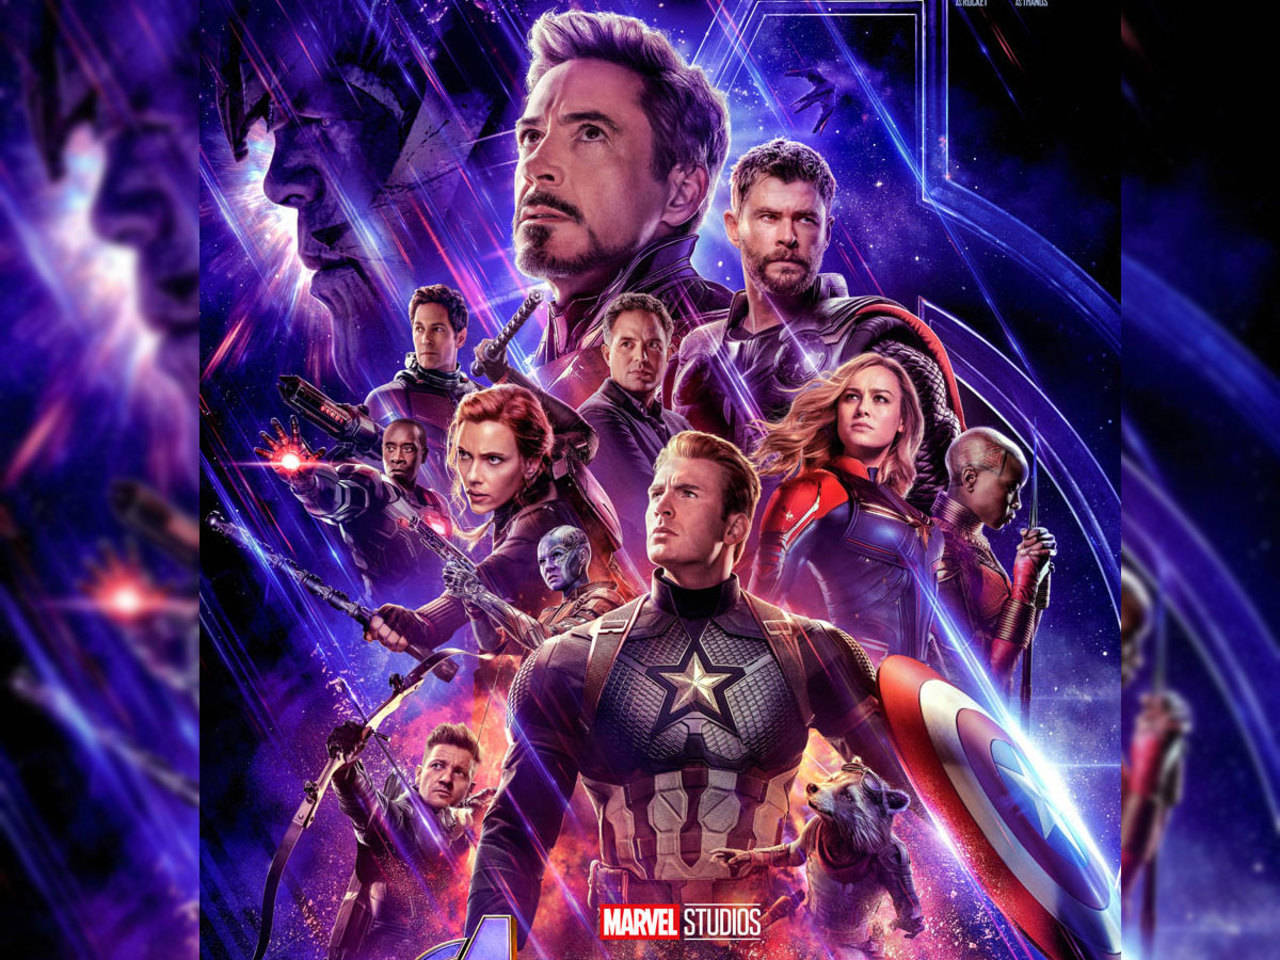 Watch: 'Avengers: Endgame' official trailer has the heroes suiting ...